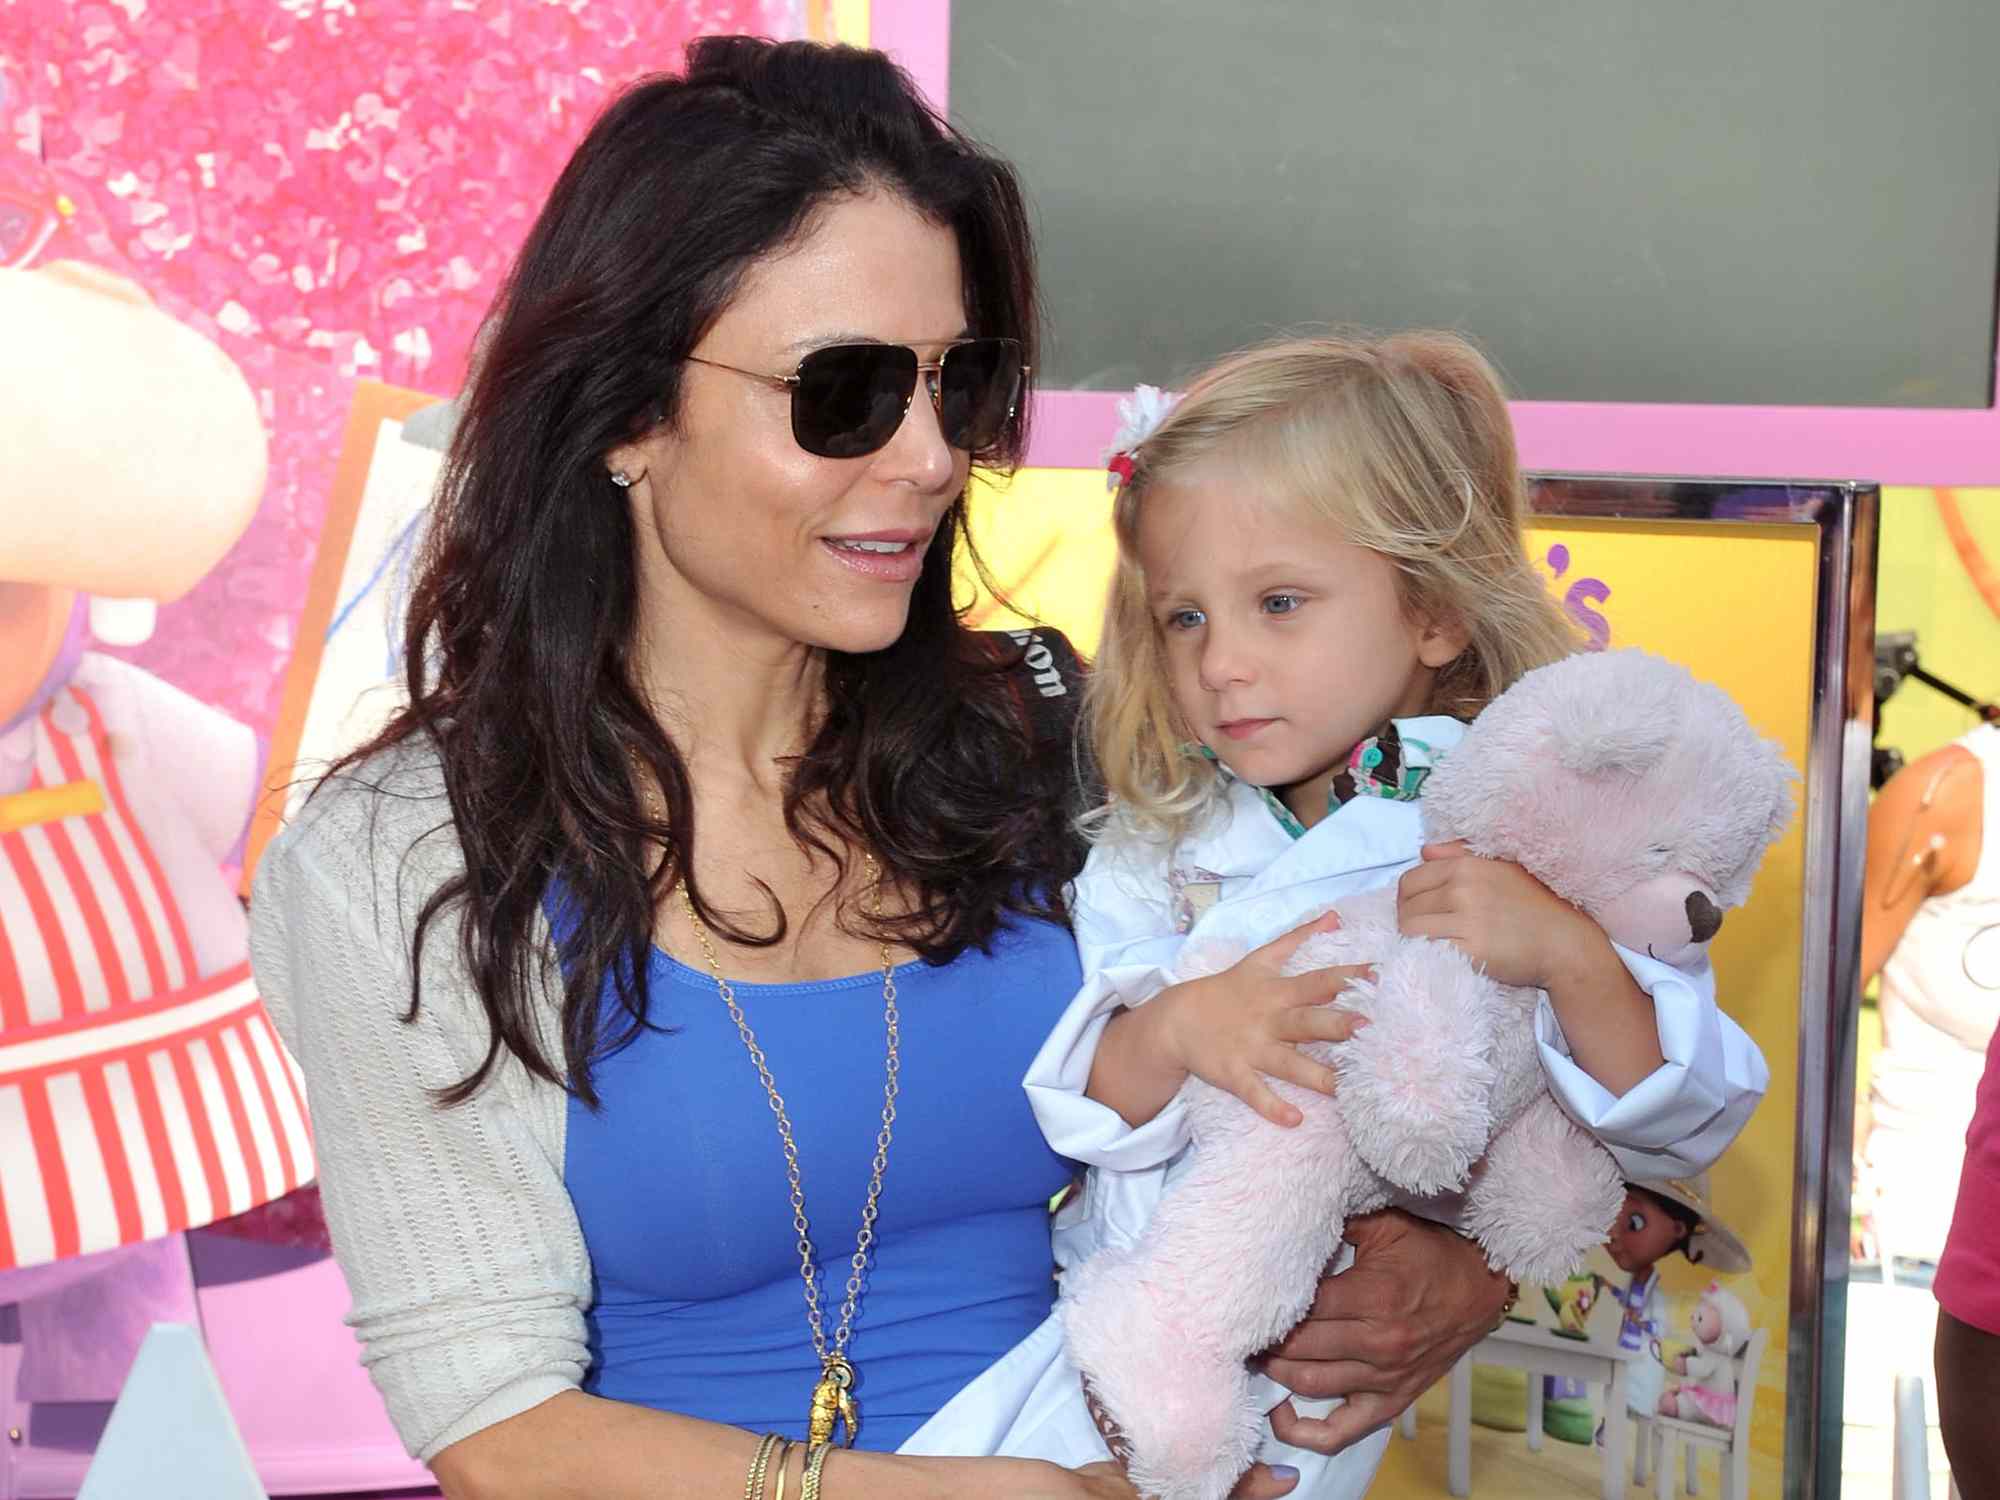 Bethenny Frankel and daughter Bryn Casey Hoppy (R) attend the Doc Mobile Tour at the Disney Store on August 21, 2013 in New York City